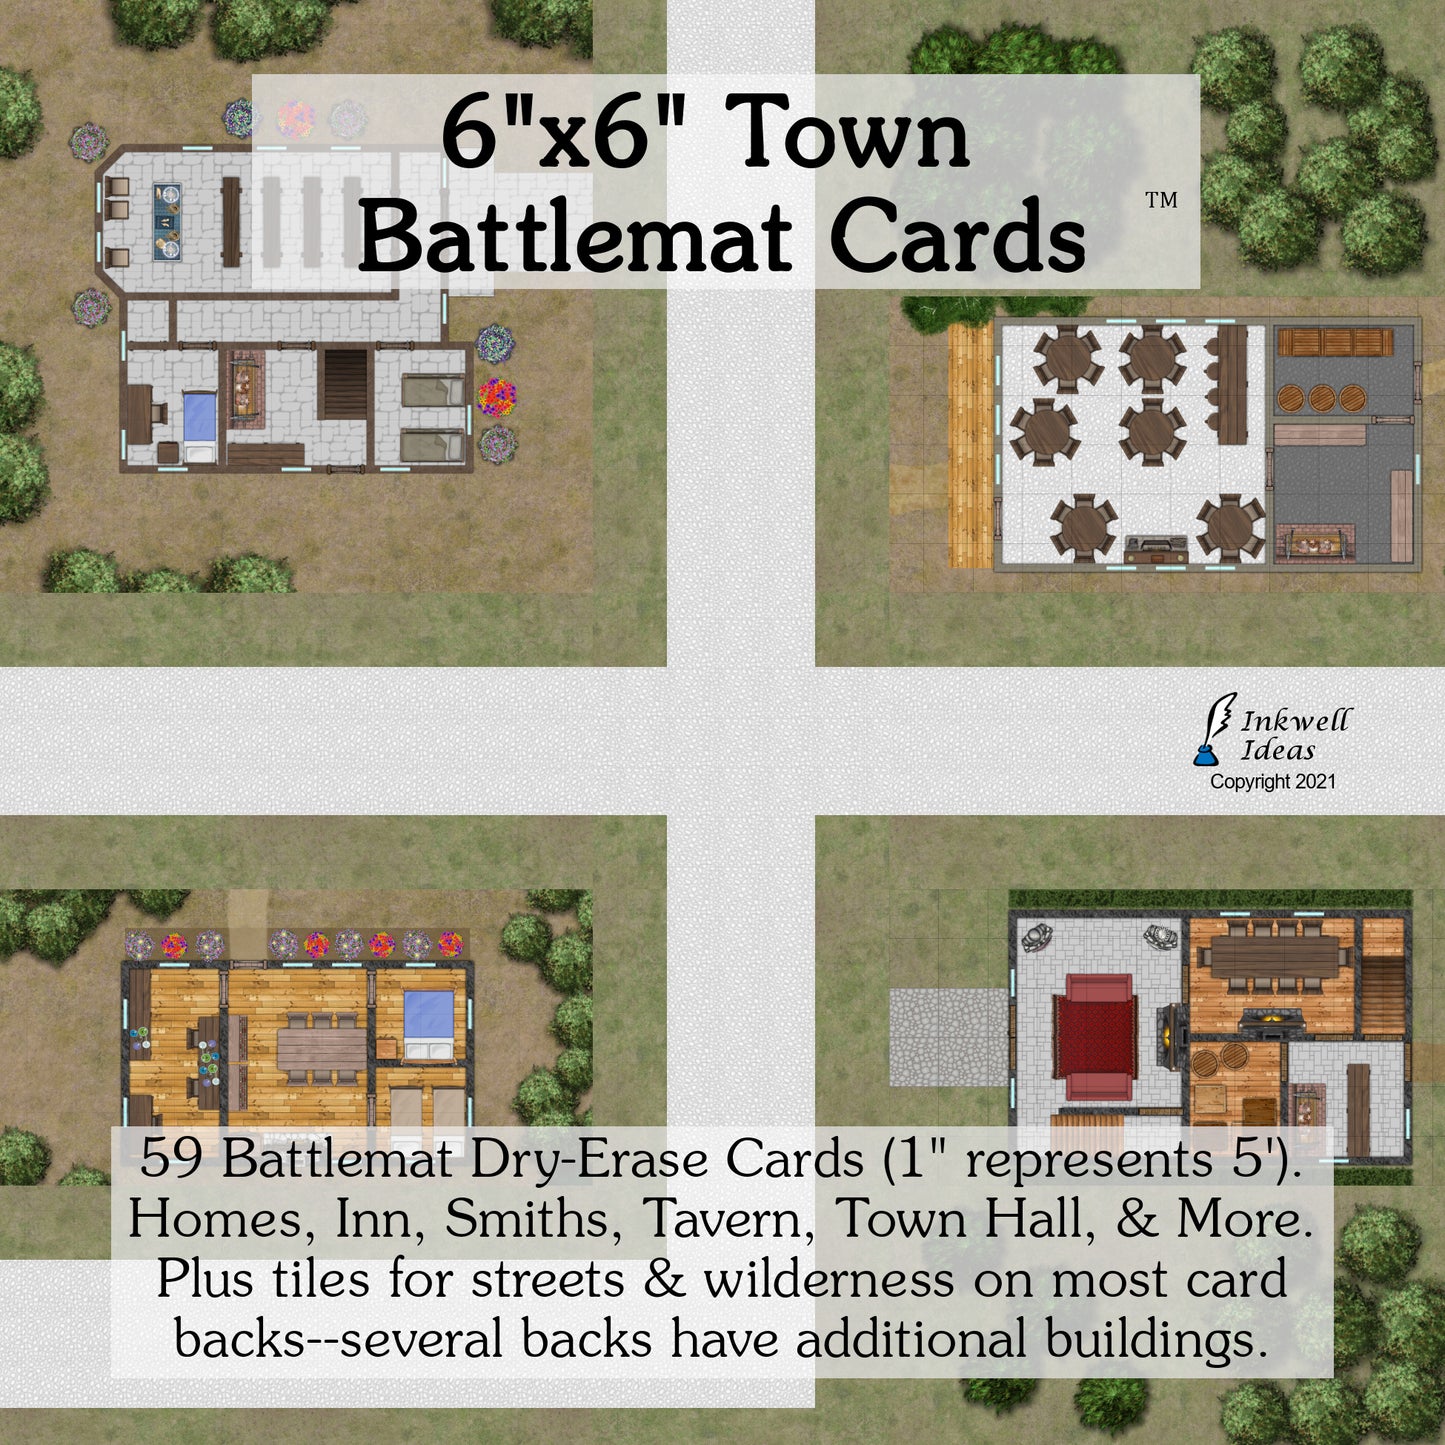 6"x6" Battlemat Town Cards (Based on Town Sidequests)